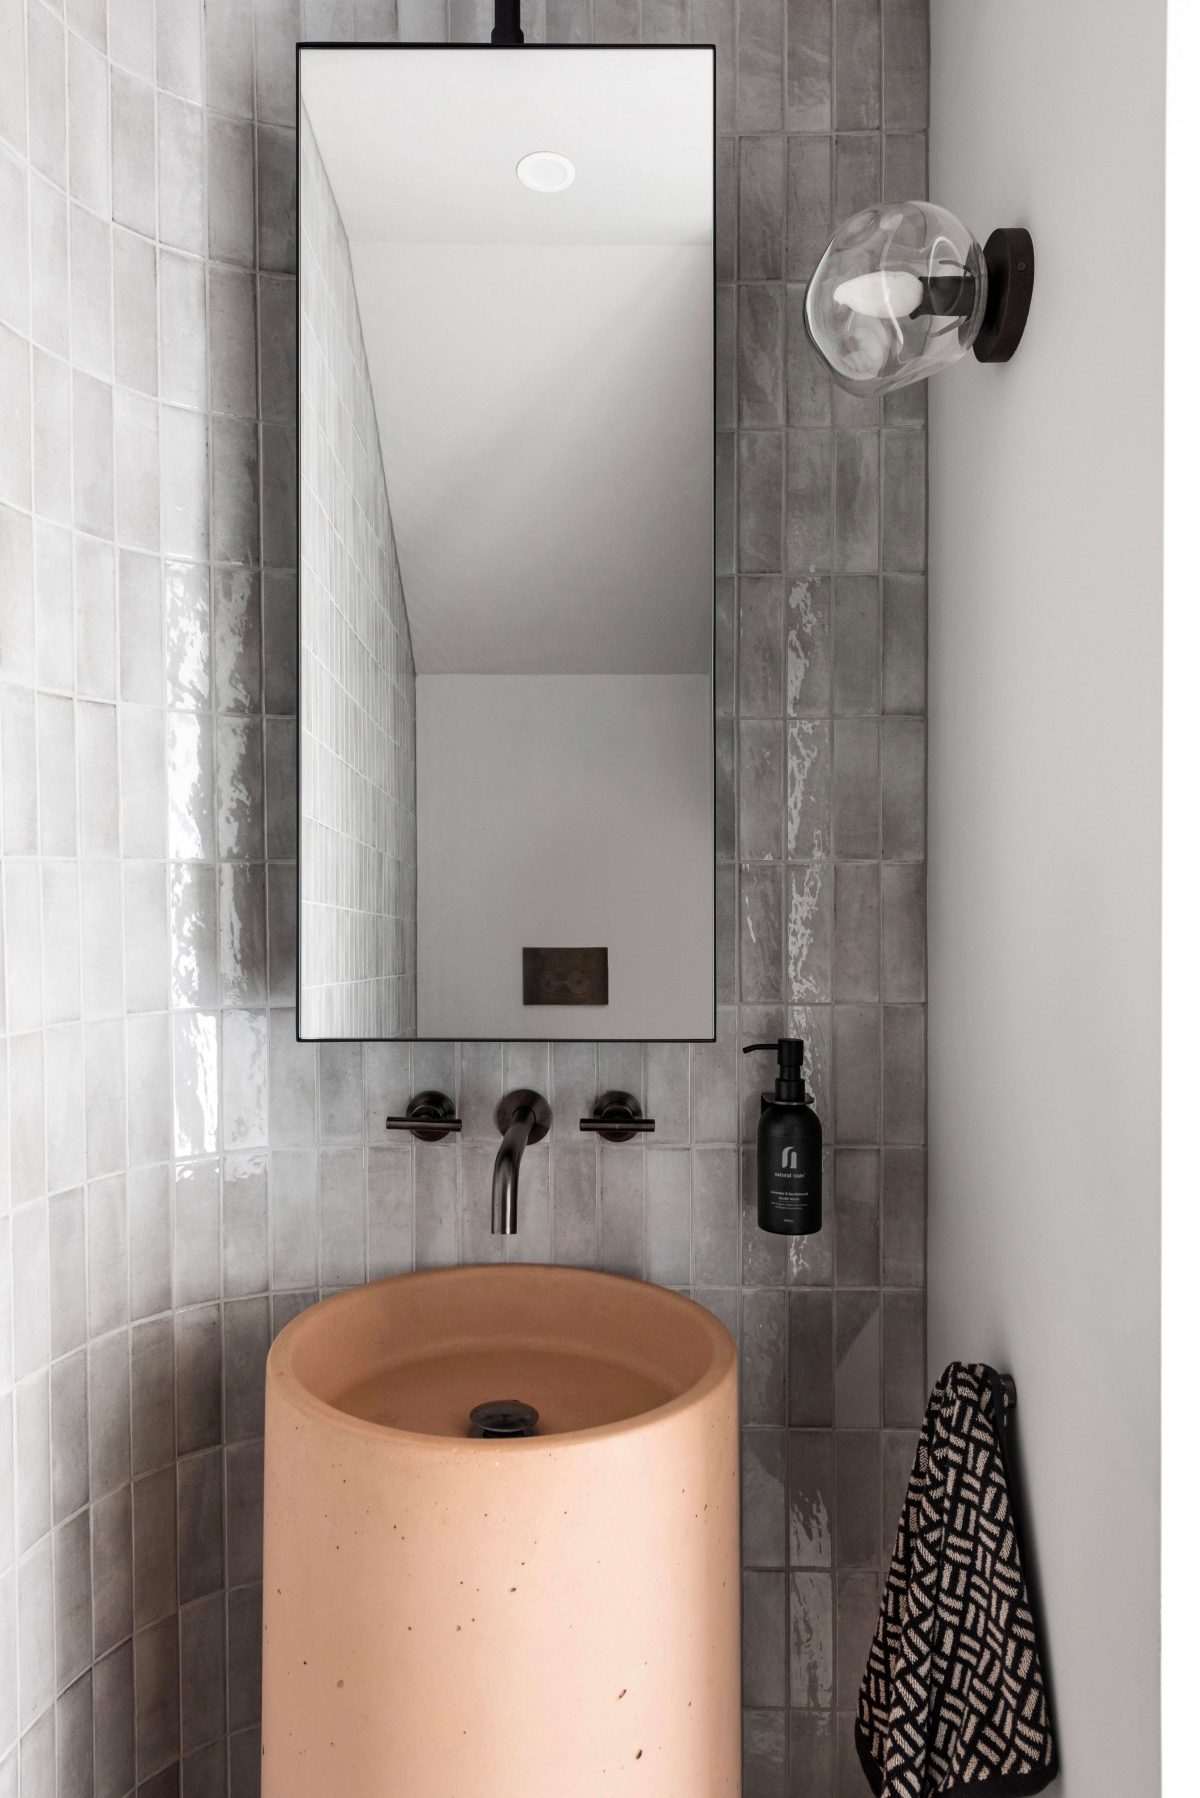 Powder Room Interior Design Camberwell Curved Tiled Feature Wall Hanging Mirror Pink Concrete Basin